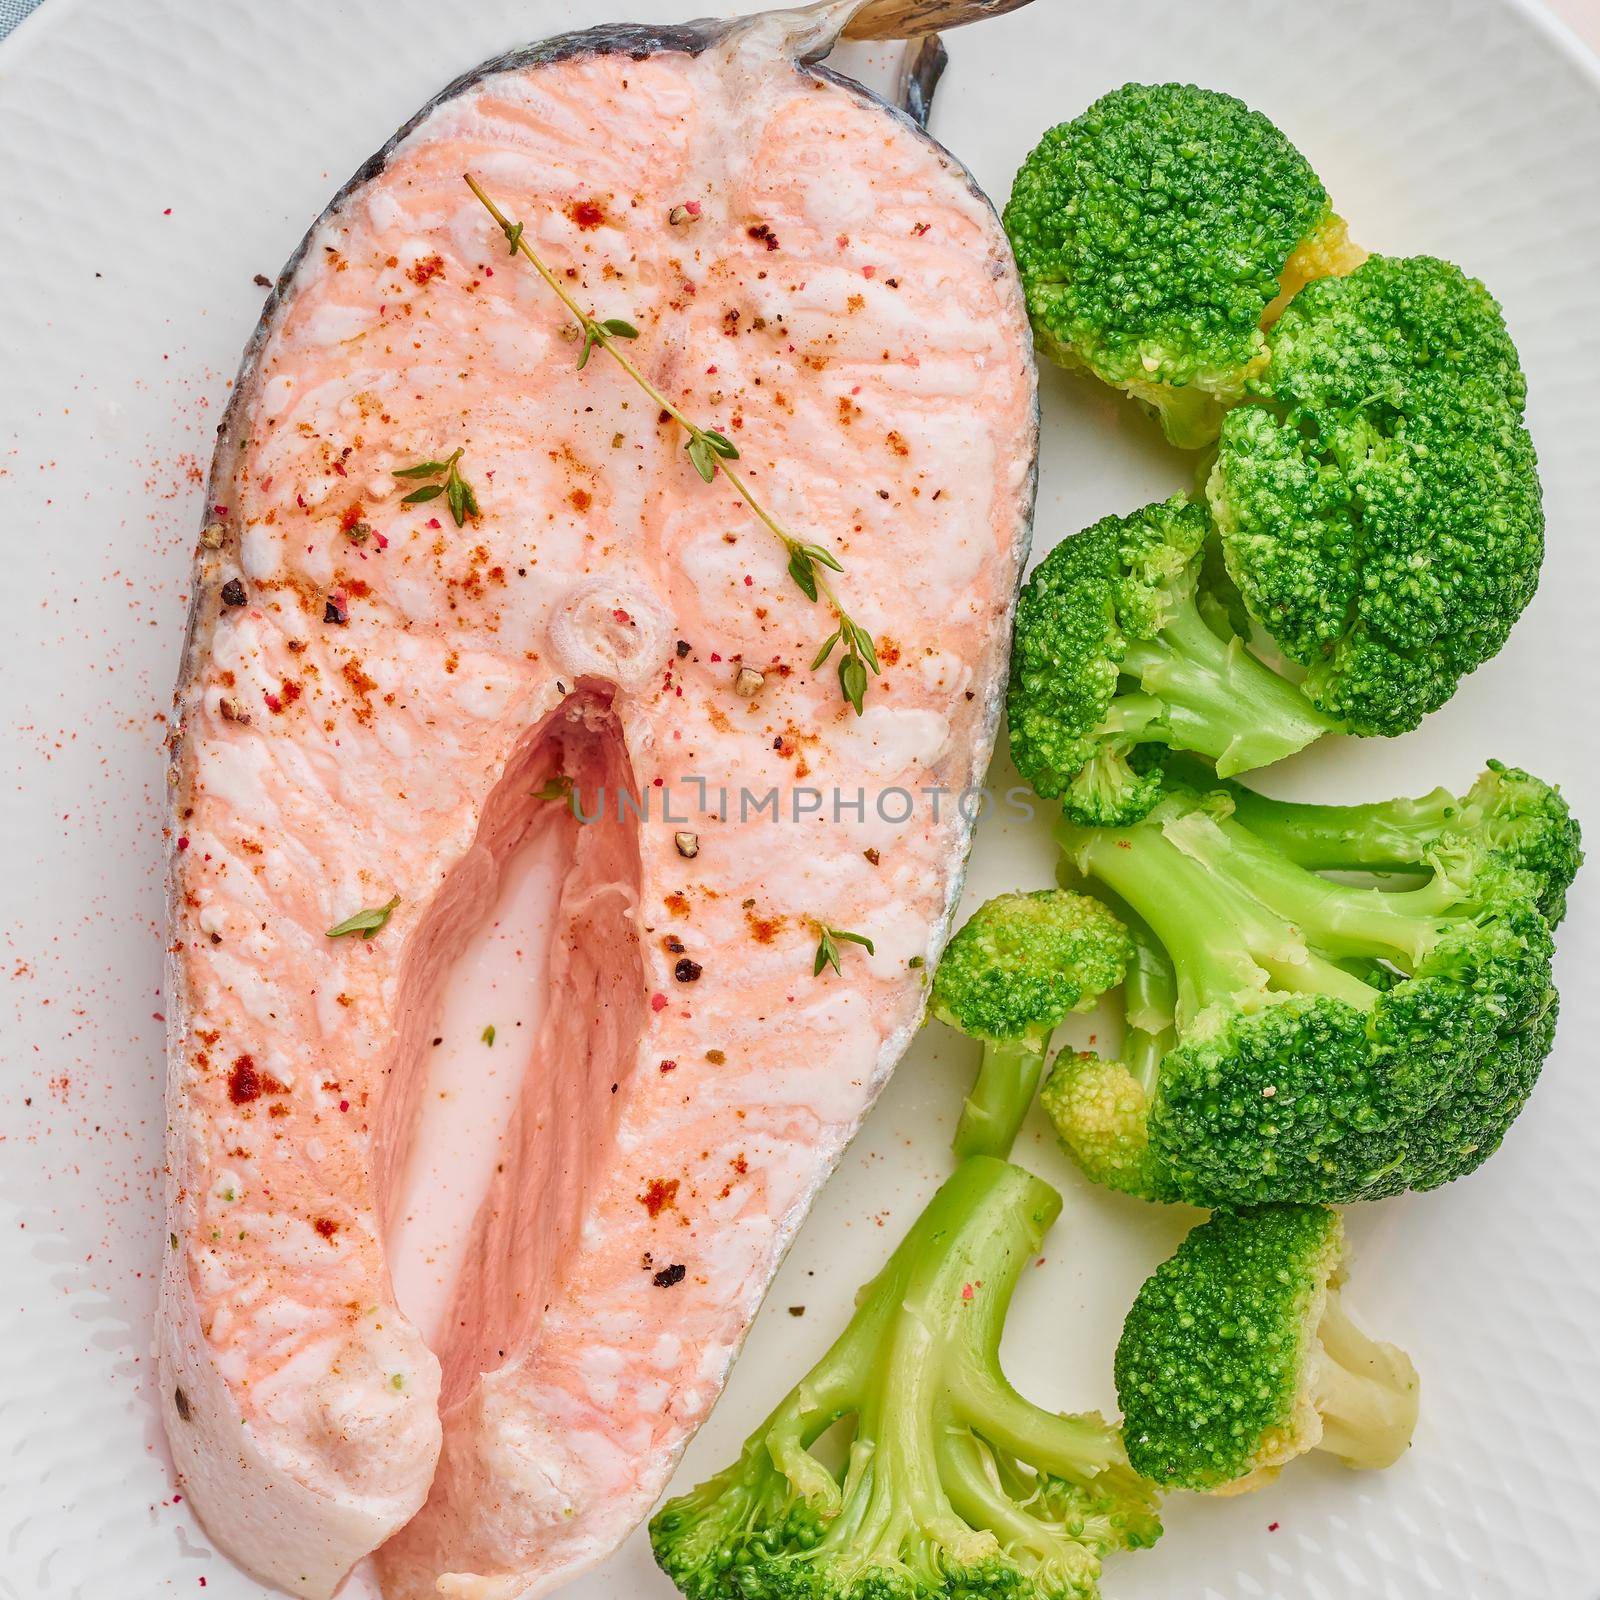 Steam salmon, broccoli, paleo, keto or fodmap diet. White plate on a blue table, top view, close up